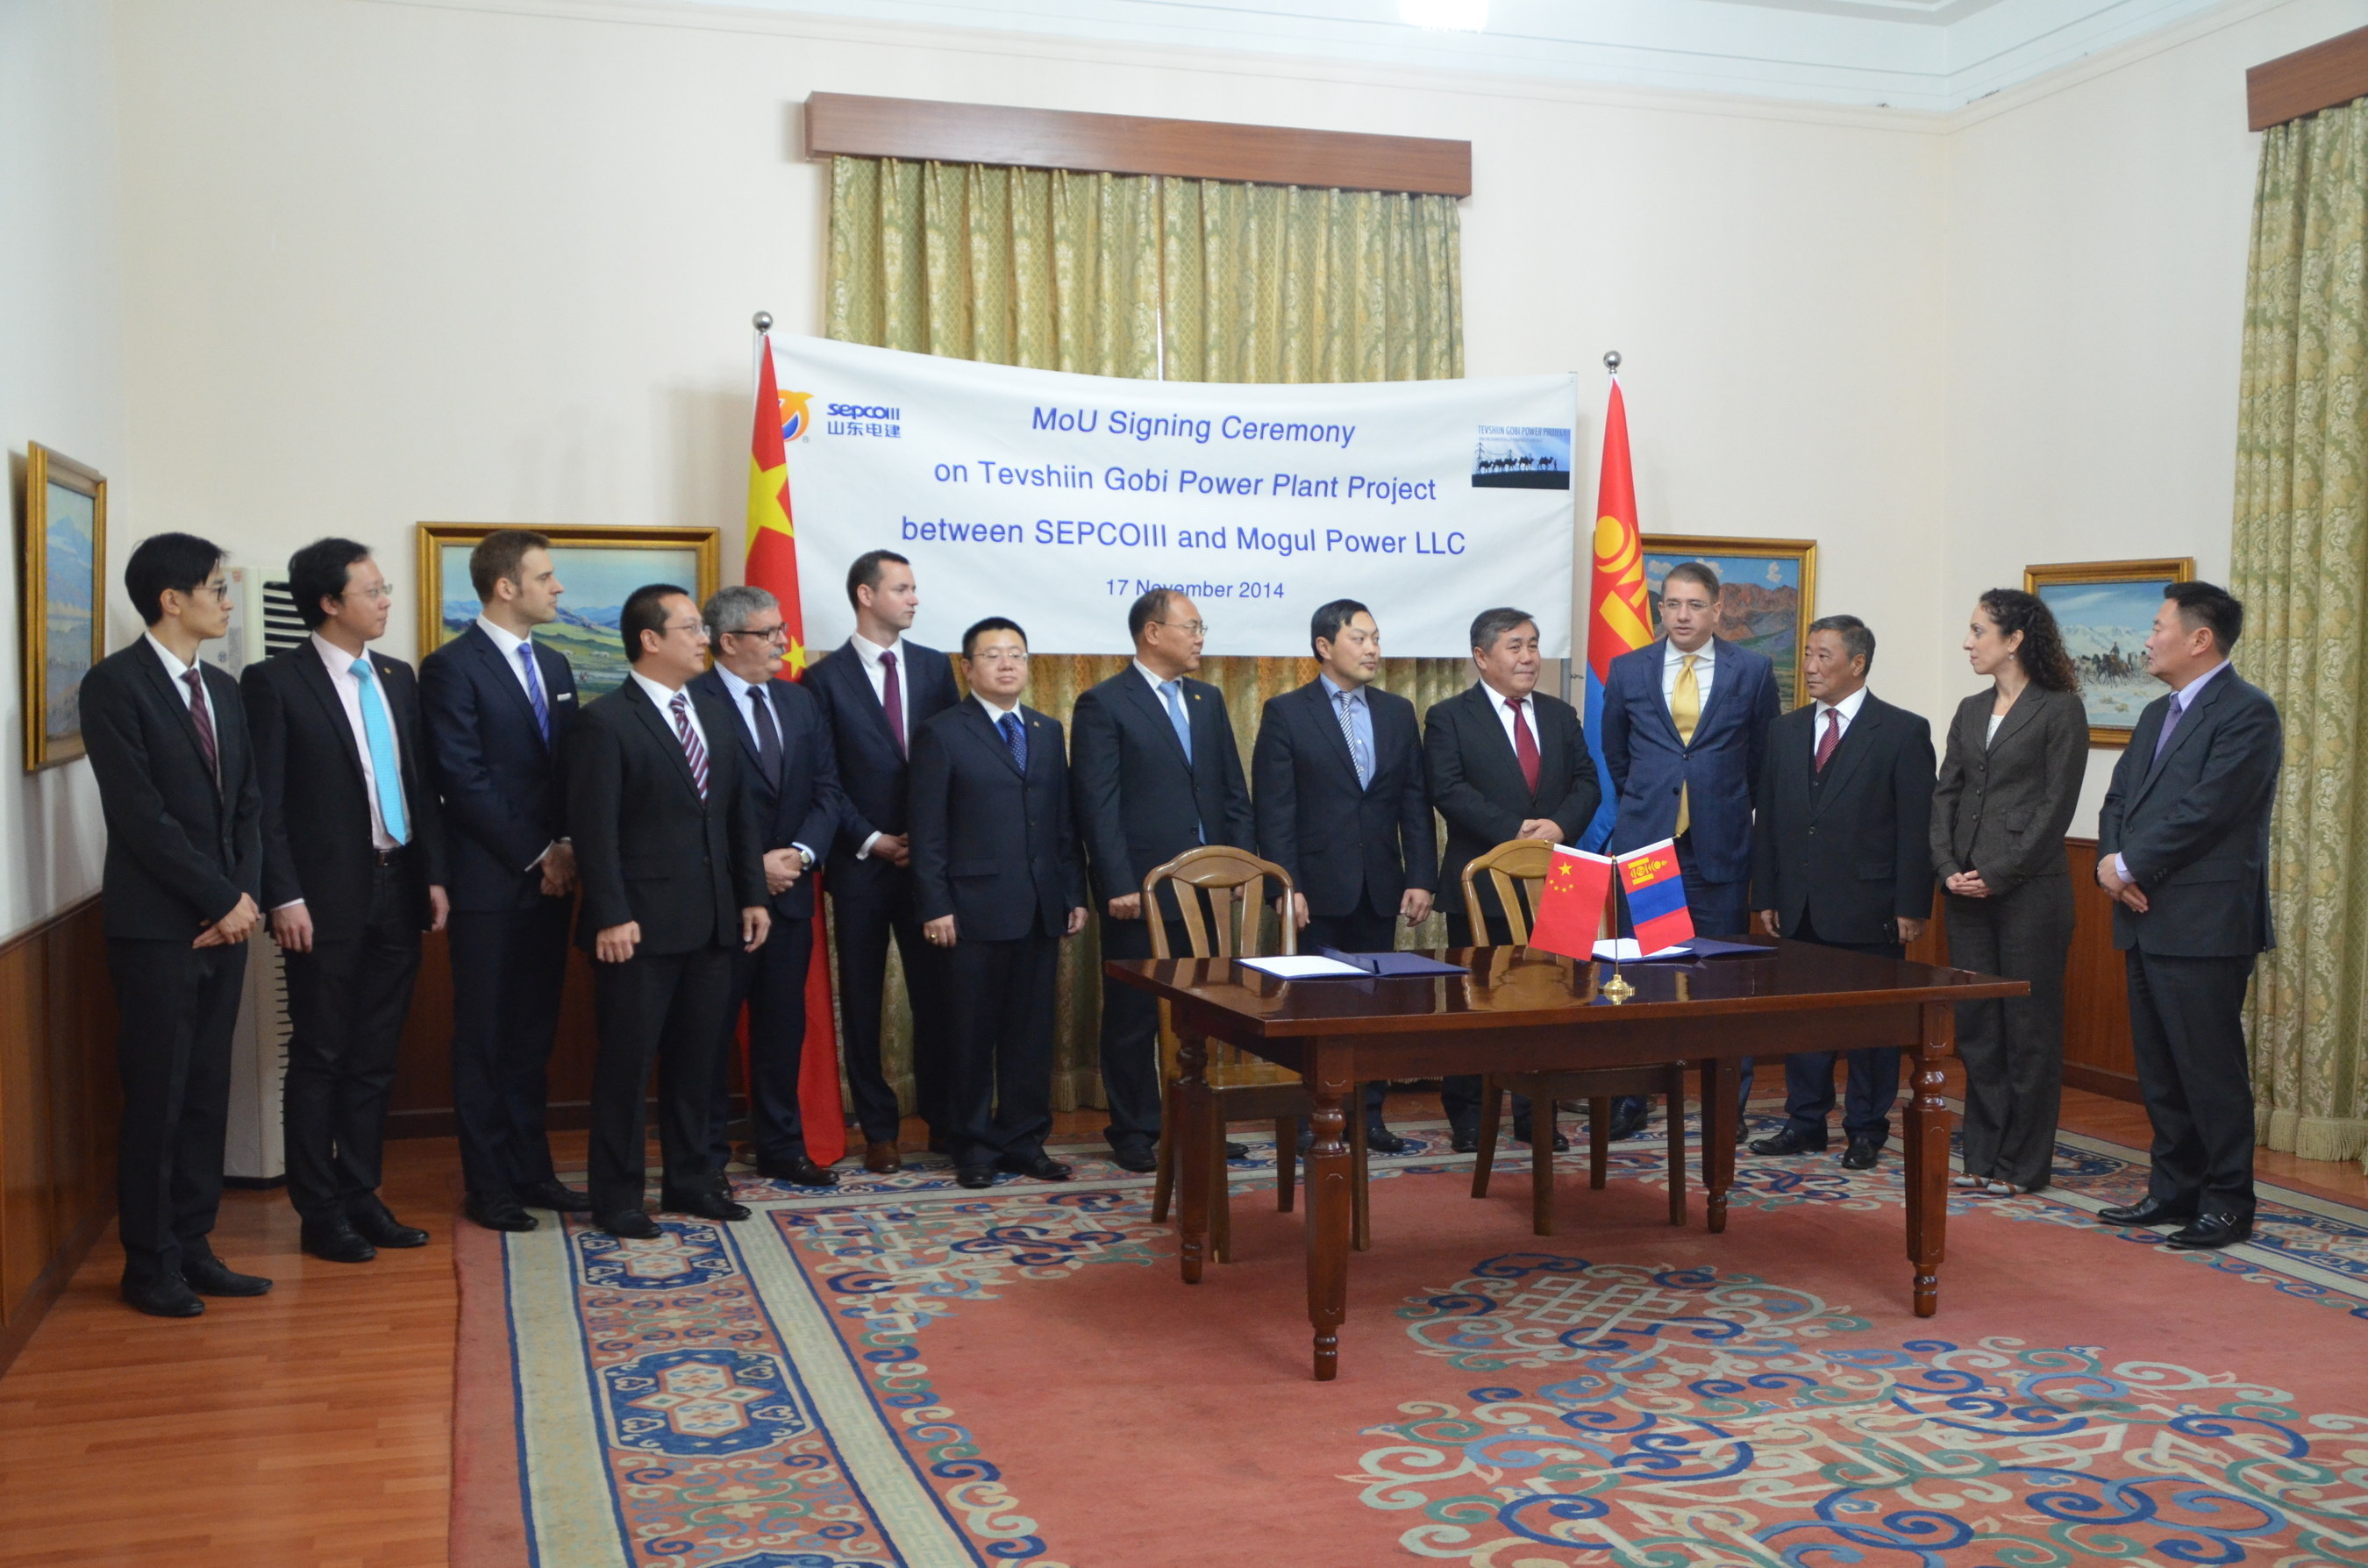 The Mogul Power LLC, Firerbird and SepcoIII teams join the Ambassador of Mongolia, Mr. Sukhbaatar Ts., and the Senior Counsellor of Commercial and Economic affairs, Mr. Khurrenbaatar B at the signing of the MOU at the Embassy of Mongolia in Beijing.